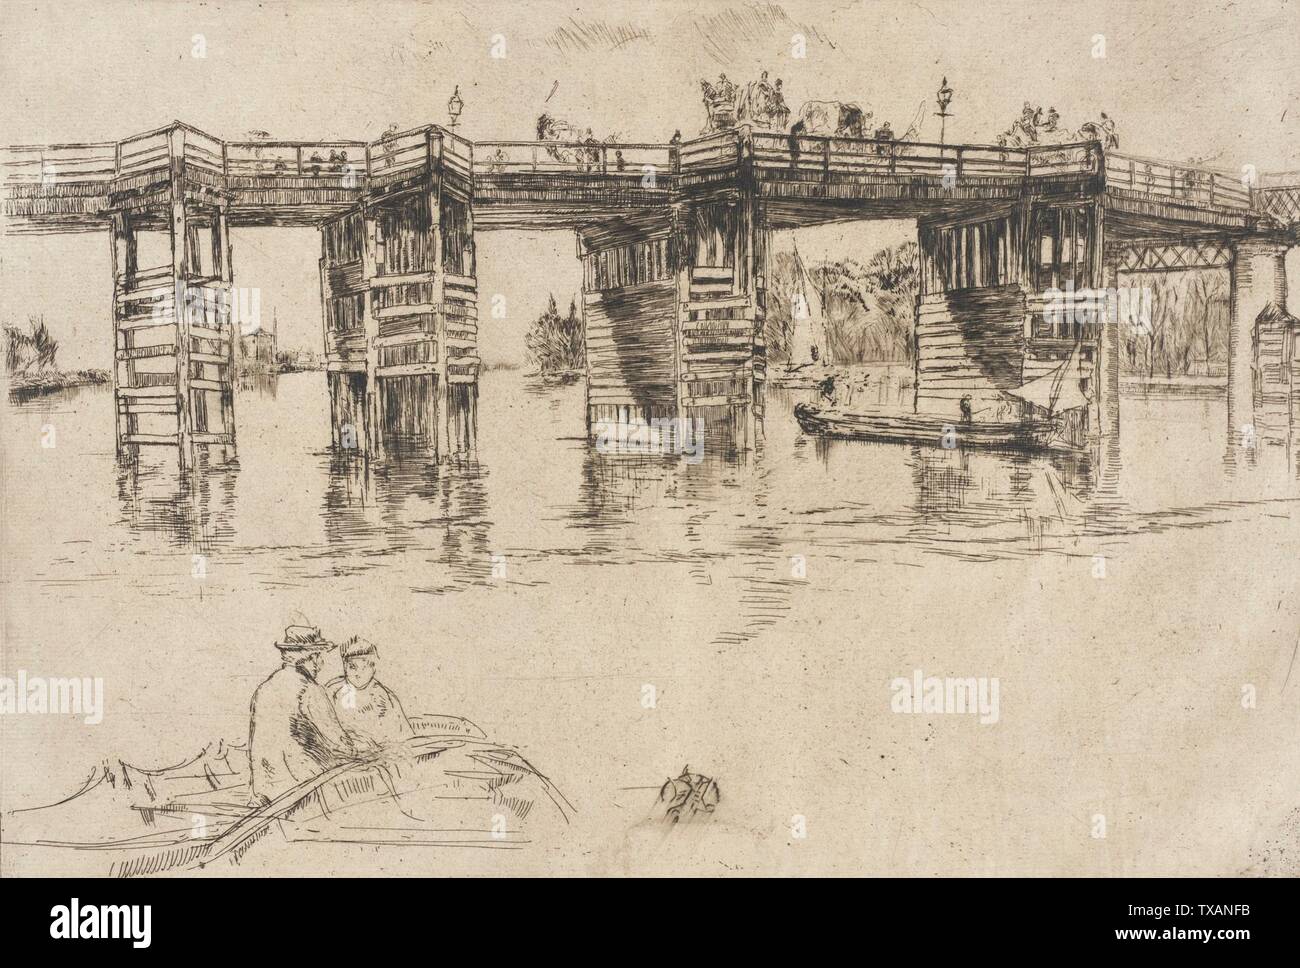 Old Putney Bridge;  United States, 1879 Prints; etchings Etching and drypoint 7 15/16 x 11 5/8 in. (20.16 x 29.53 cm) Gift of The Julius and Anita Zelman Collection (AC1992.234.9) Prints and Drawings; 1879date QS:P571,+1879-00-00T00:00:00Z/9; Stock Photo